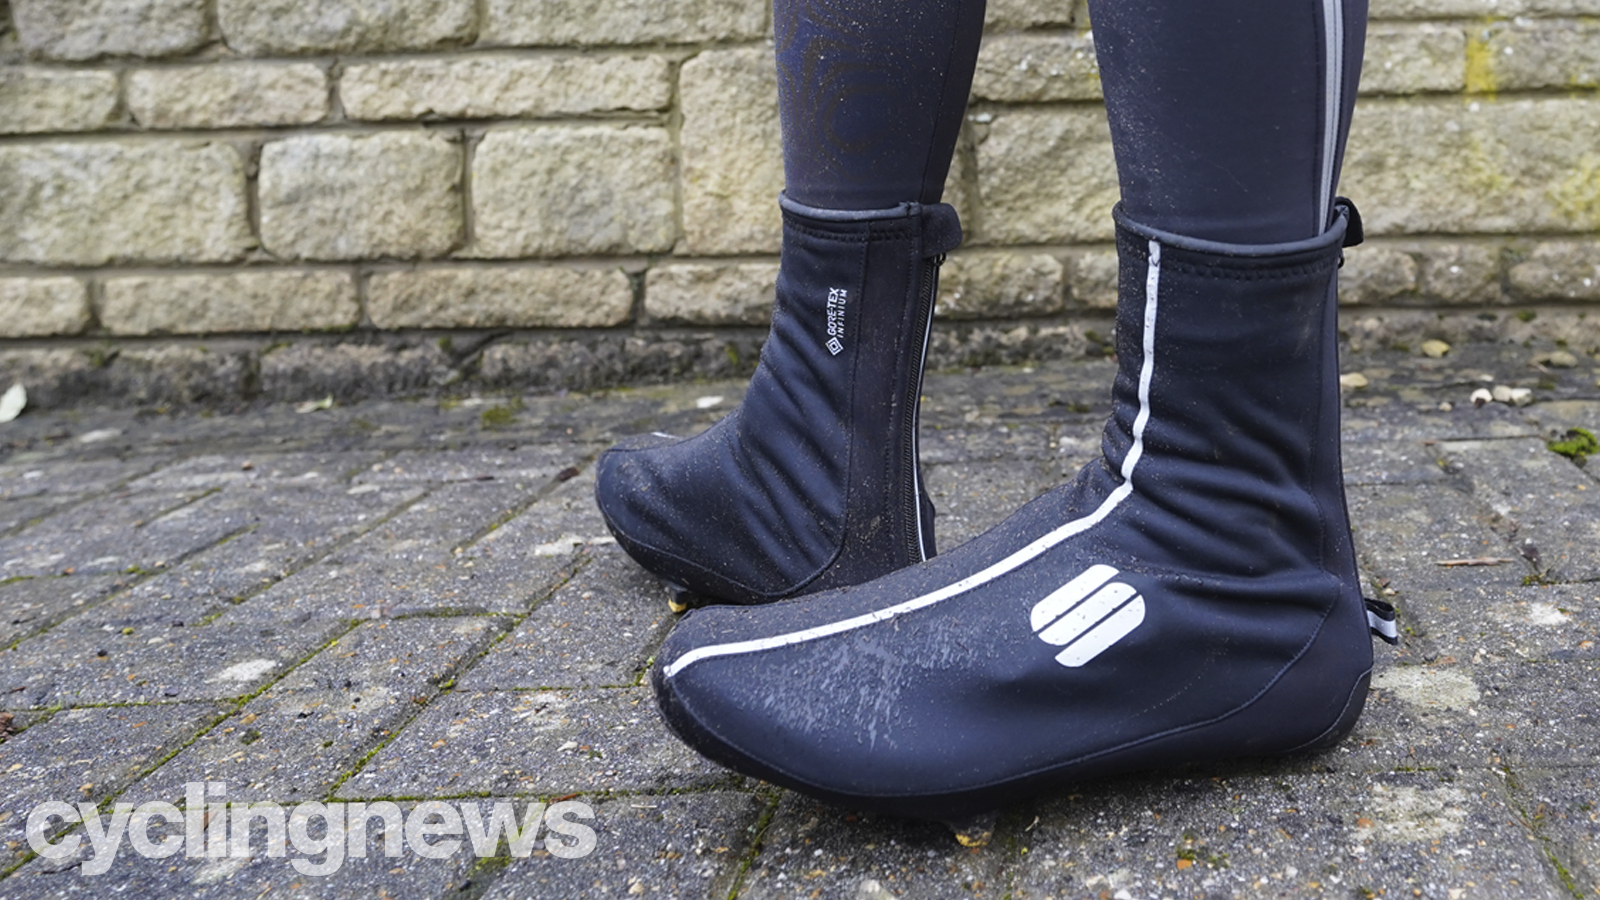 Sportful WS Reflex 2 Bootie overshoes review | Cyclingnews